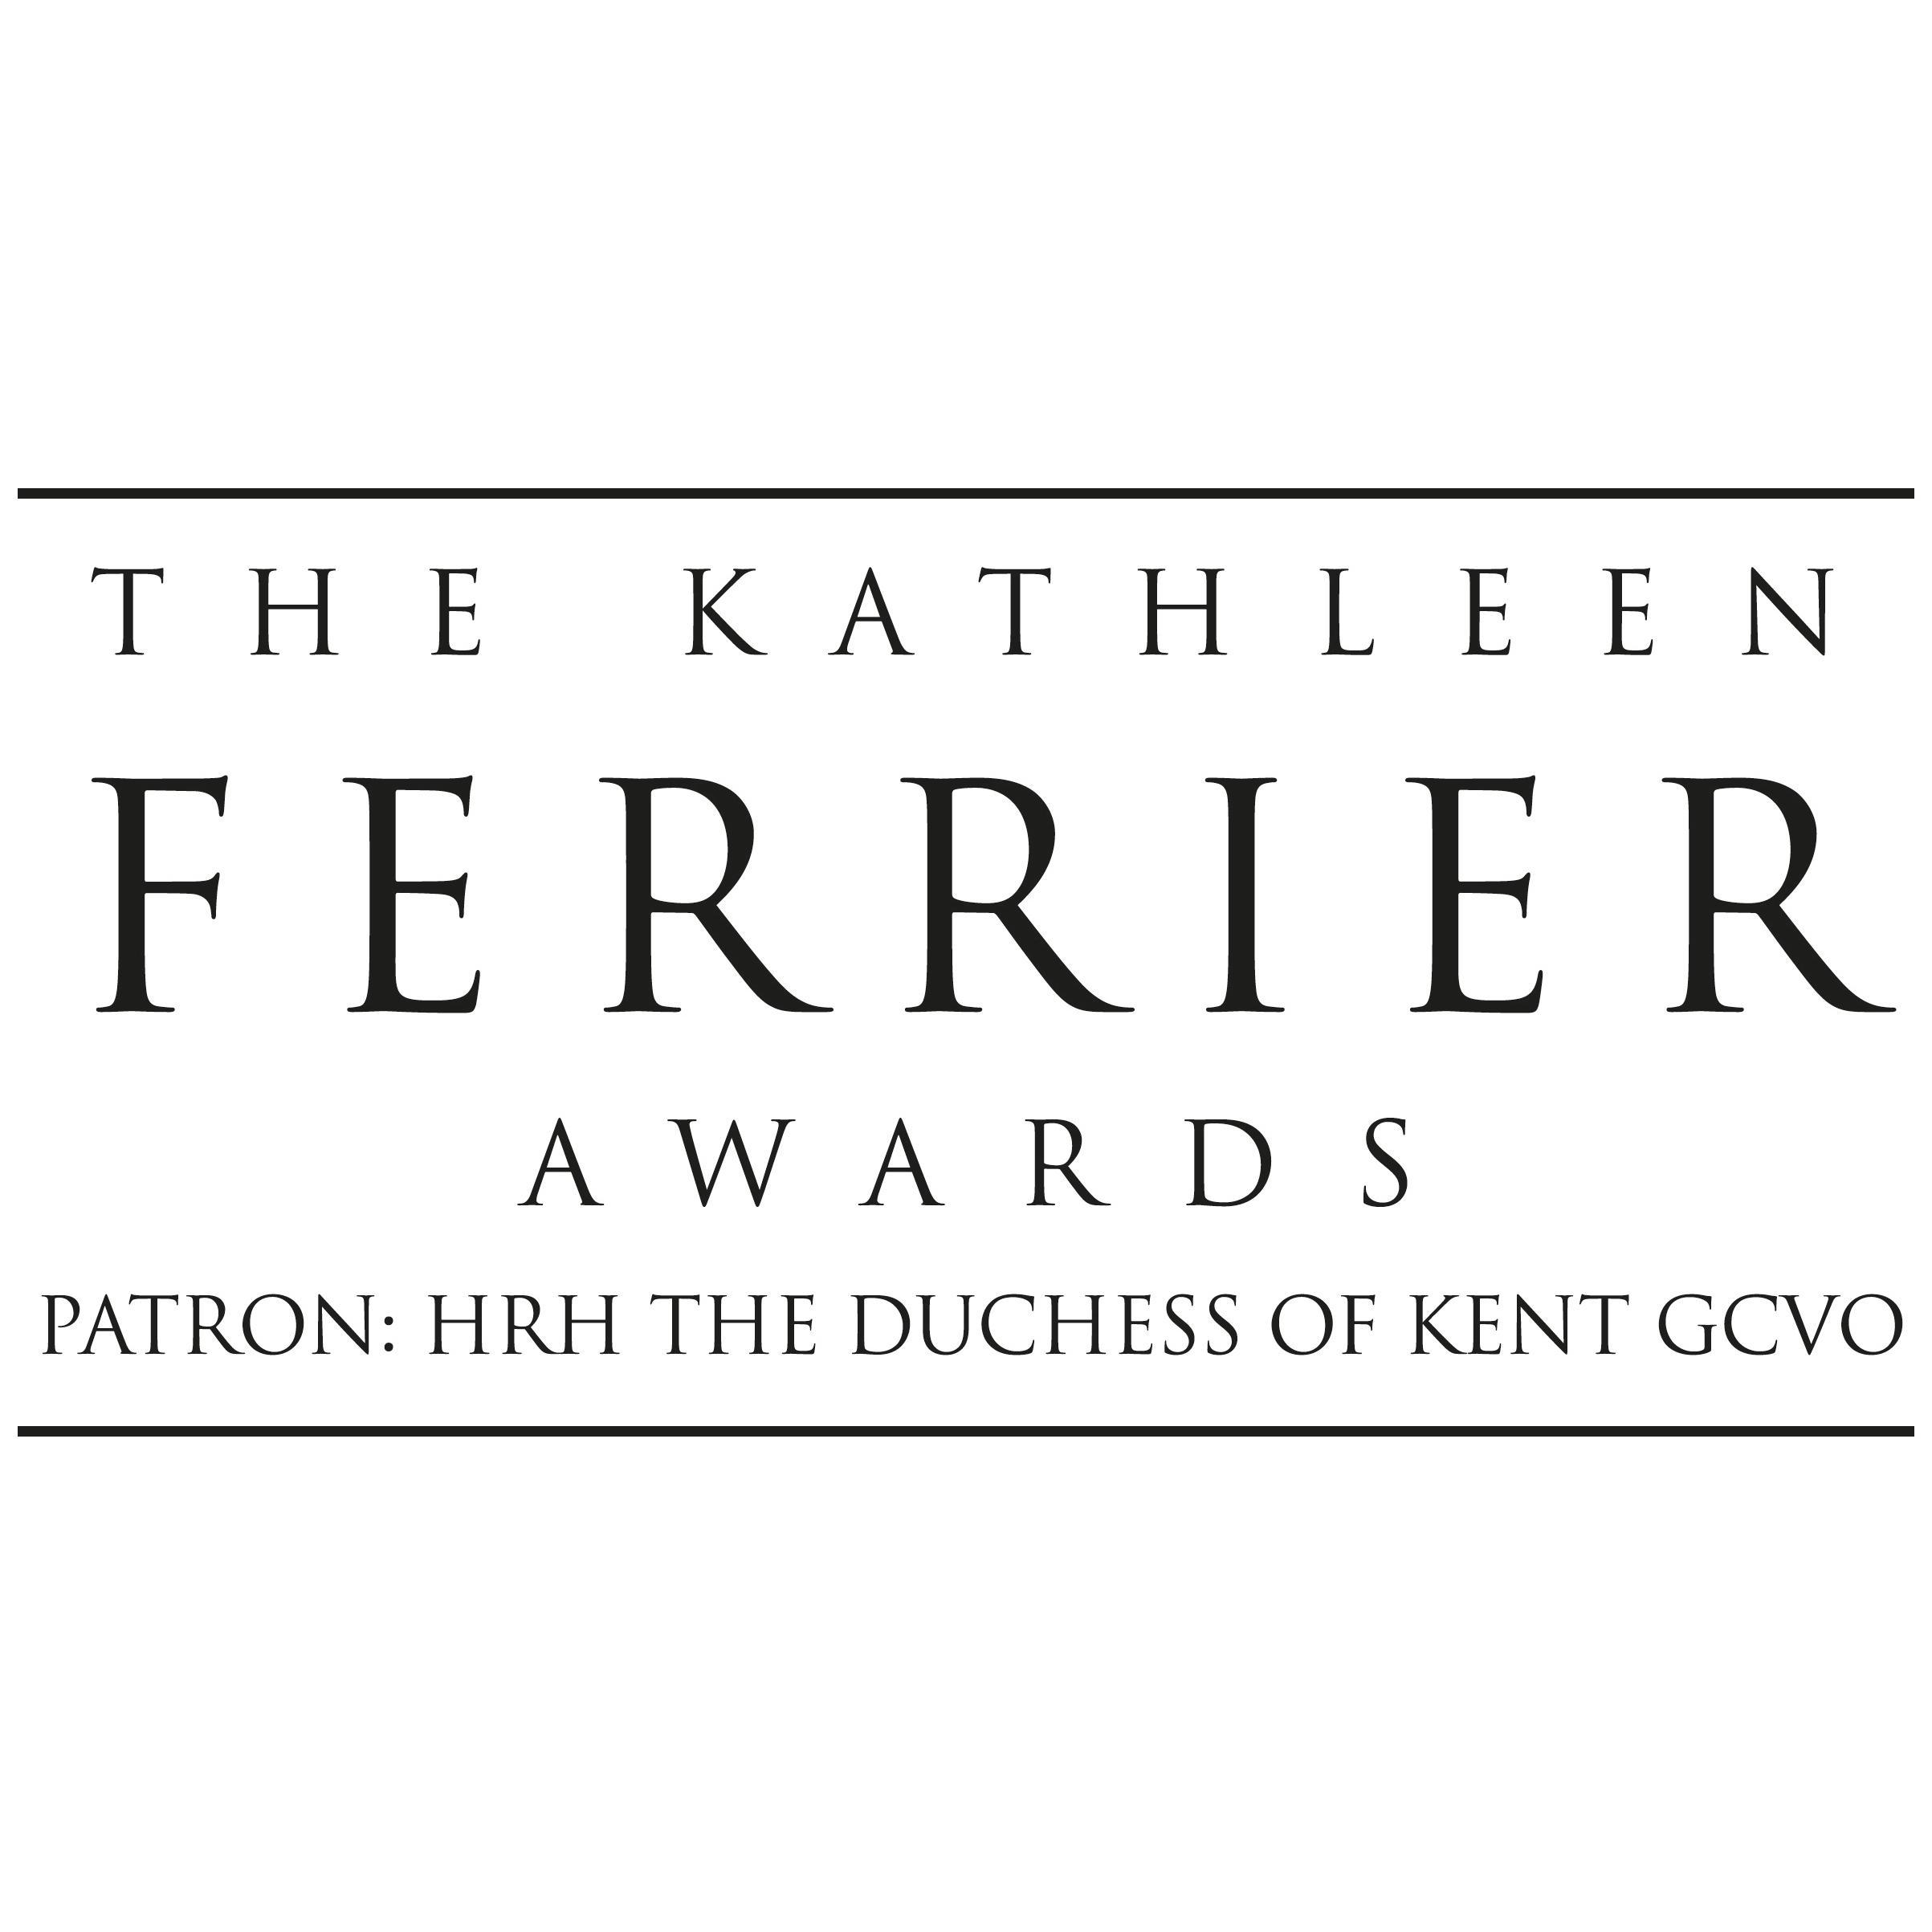 Official Twitter/X account for The Kathleen Ferrier Awards, Britain's most prestigious singing awards. Held annually at the Wigmore Hall, London.